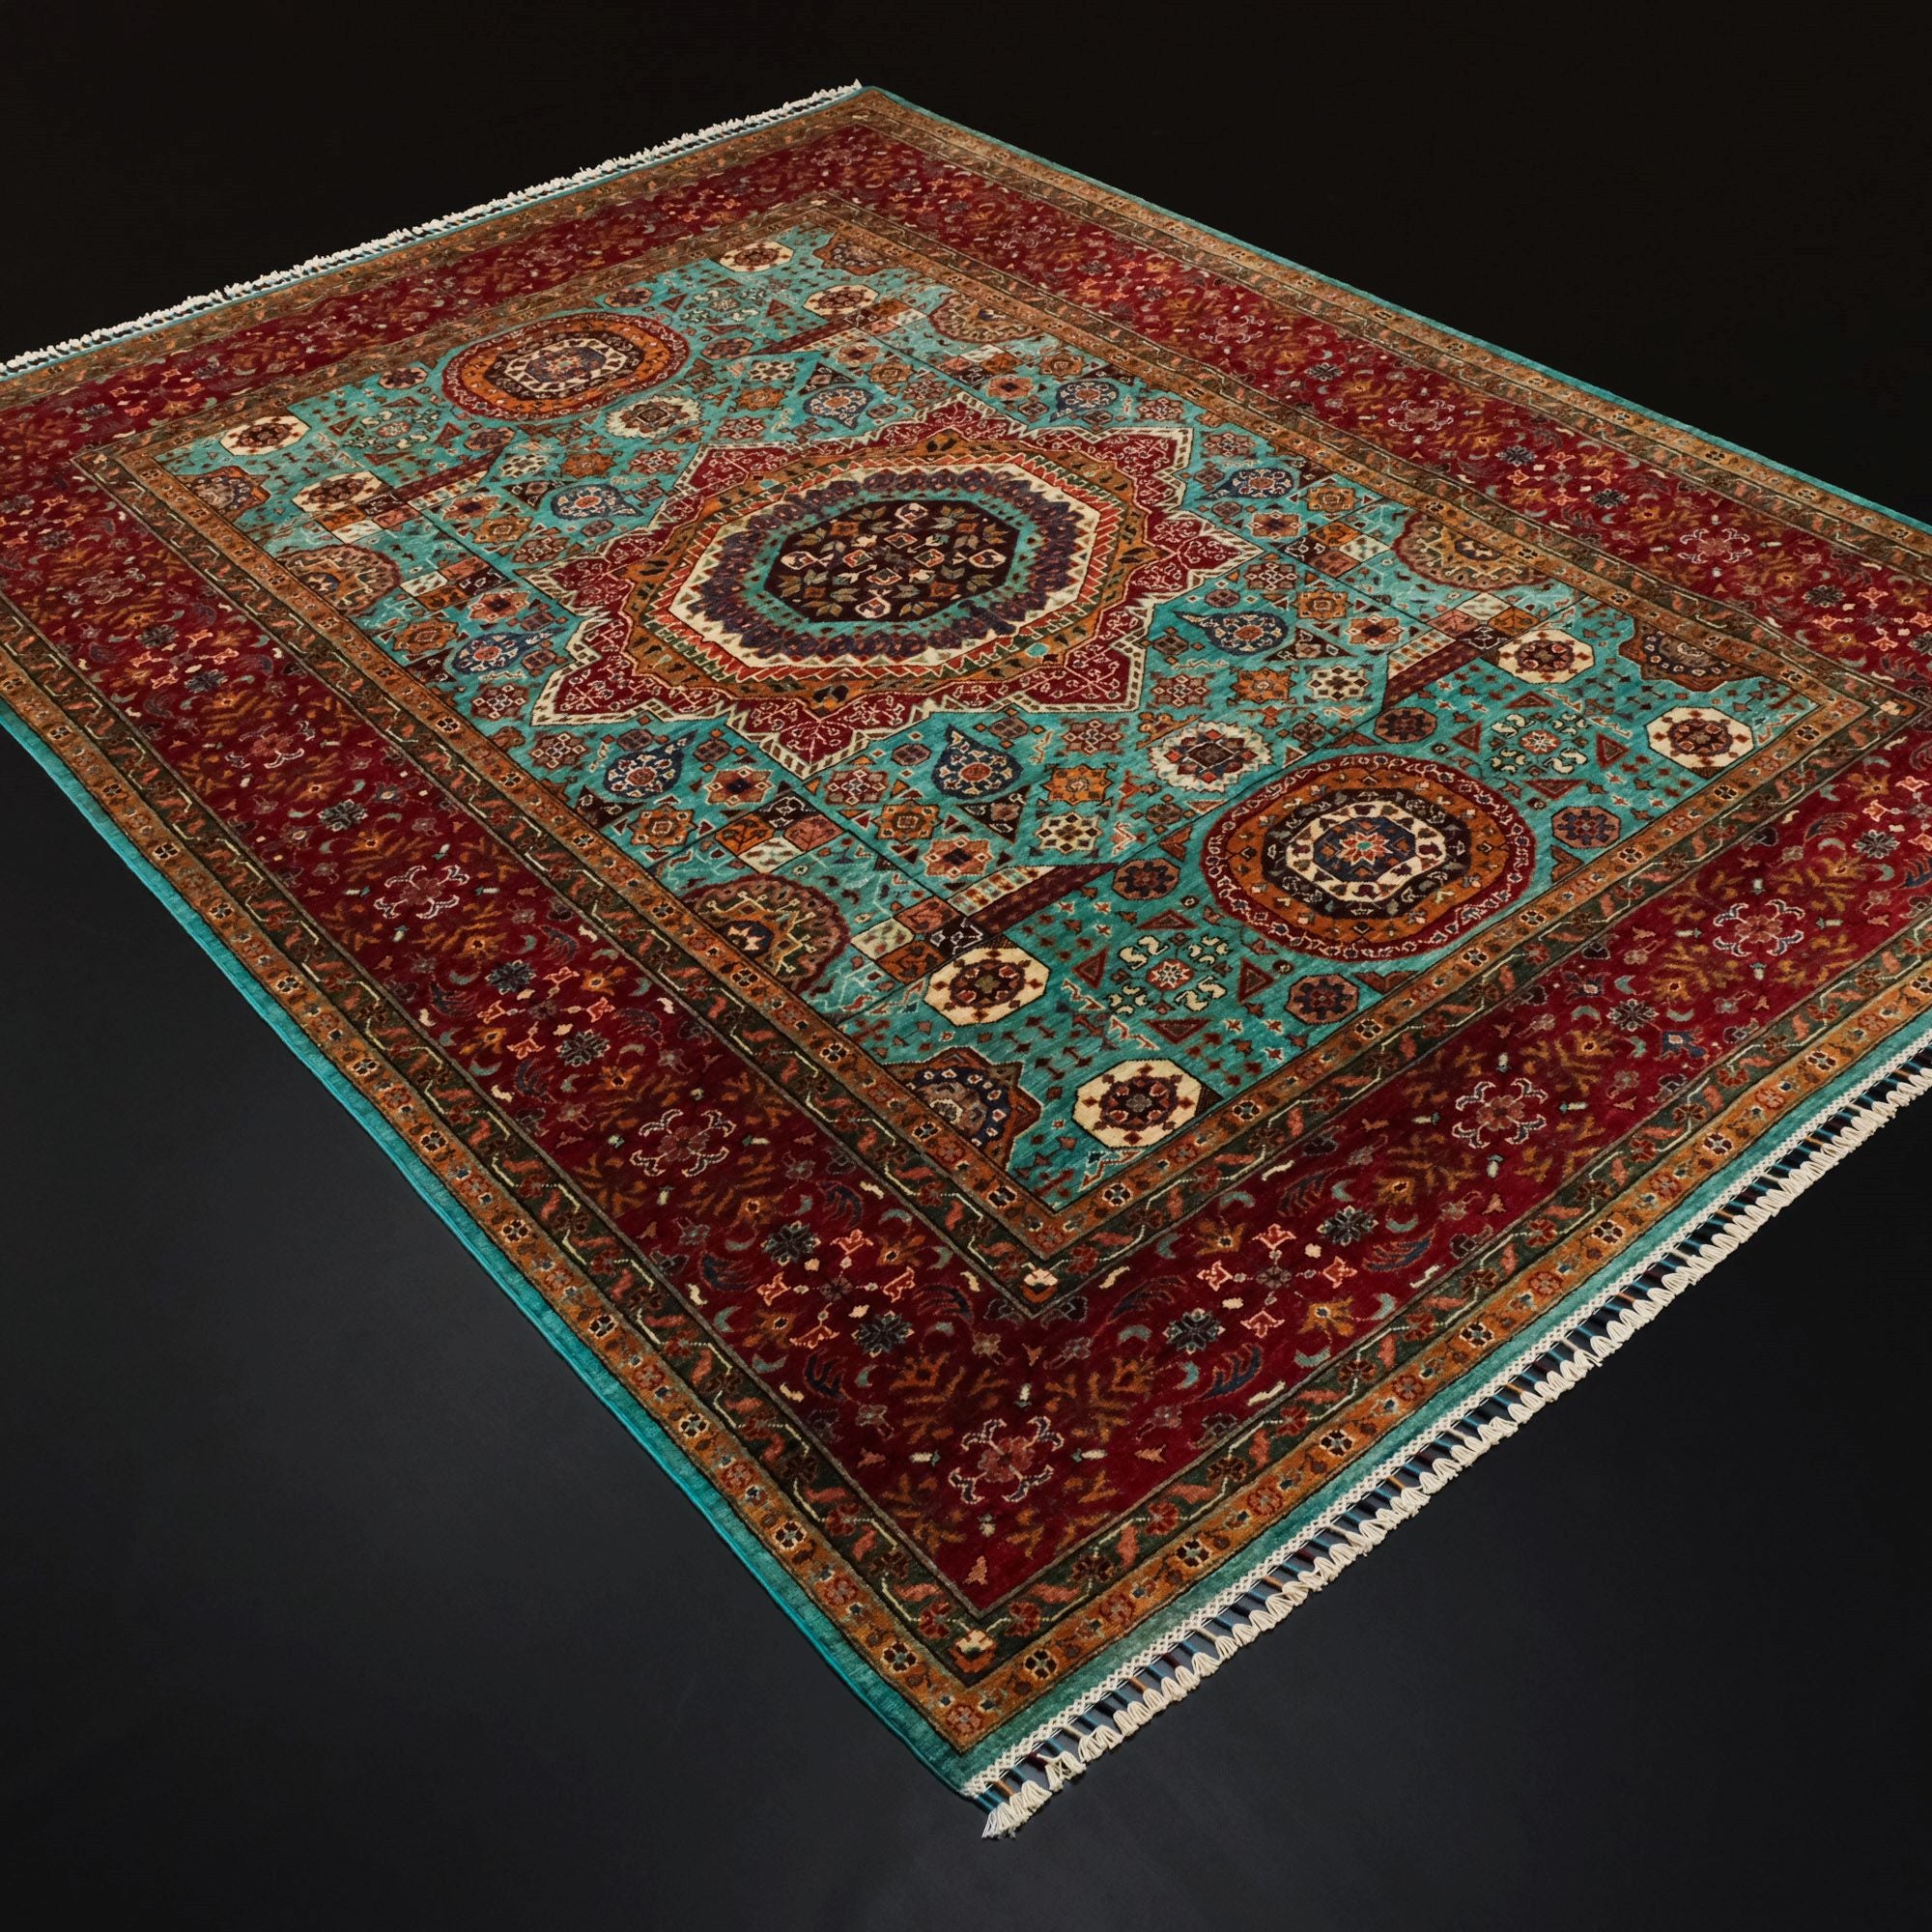 Shahzade Series Hand-Woven Mamluk Patterned Colorful Wool Carpet